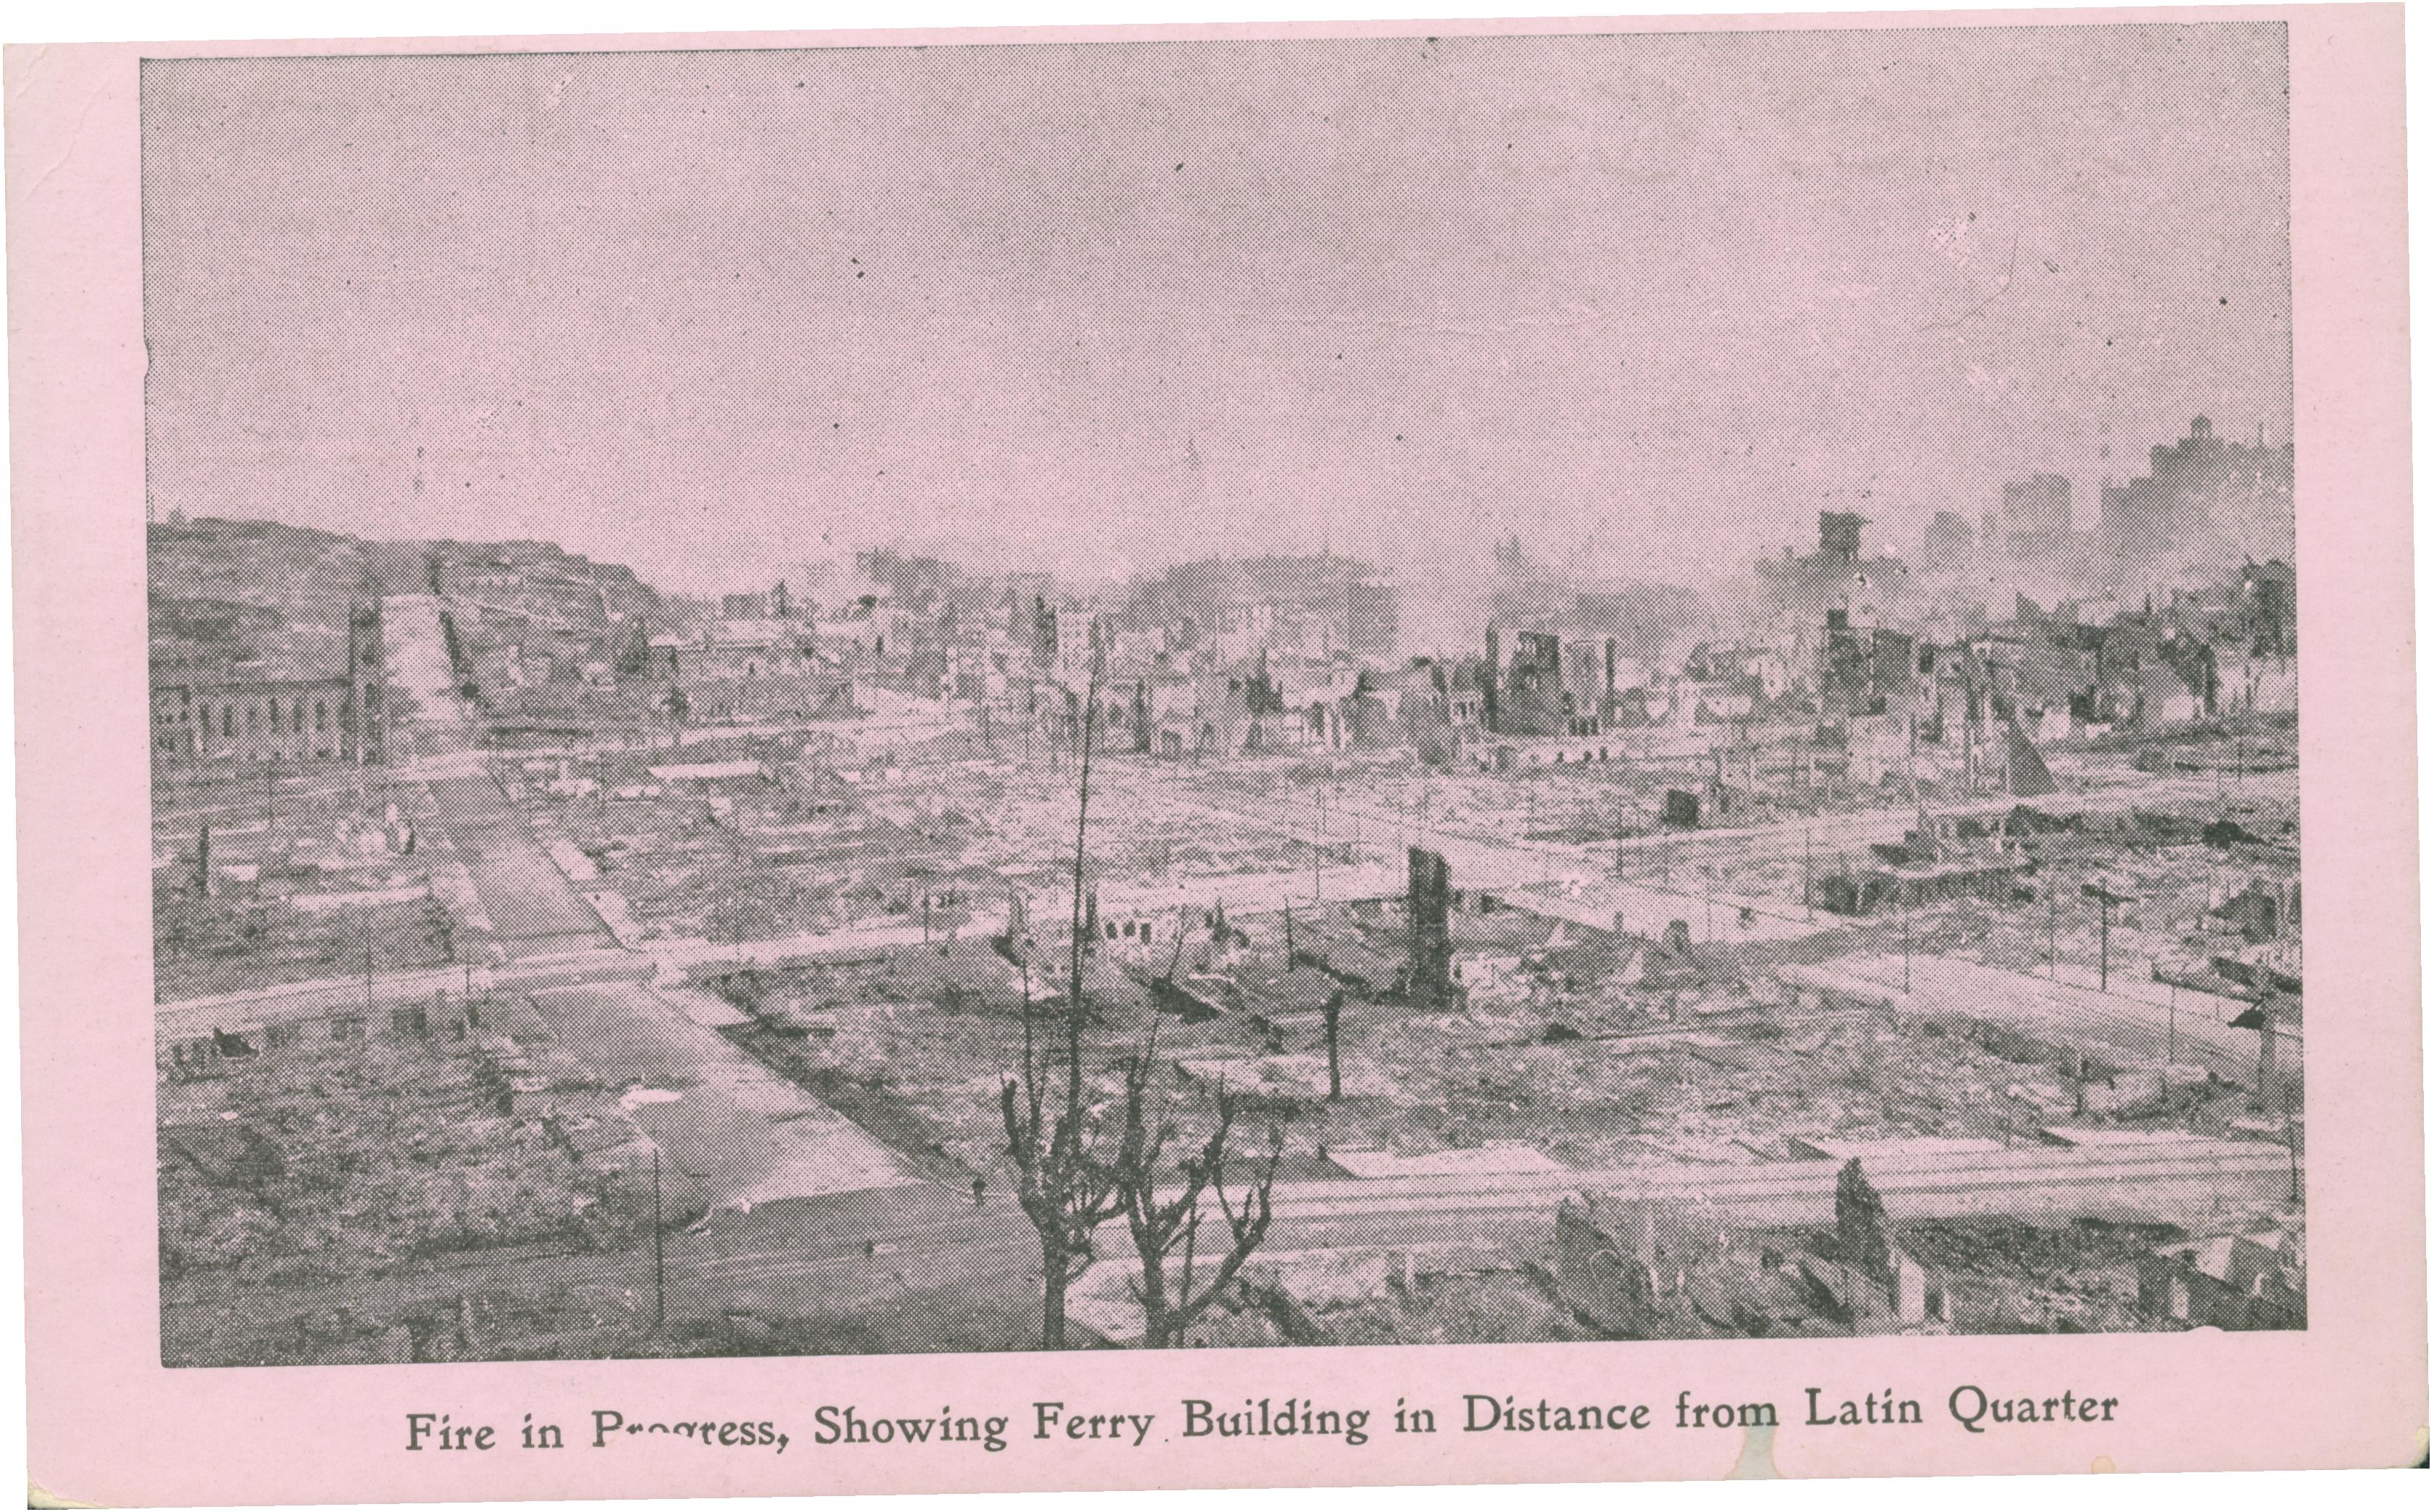 Shows a wide angle view of smoke rising above ruined buildings.